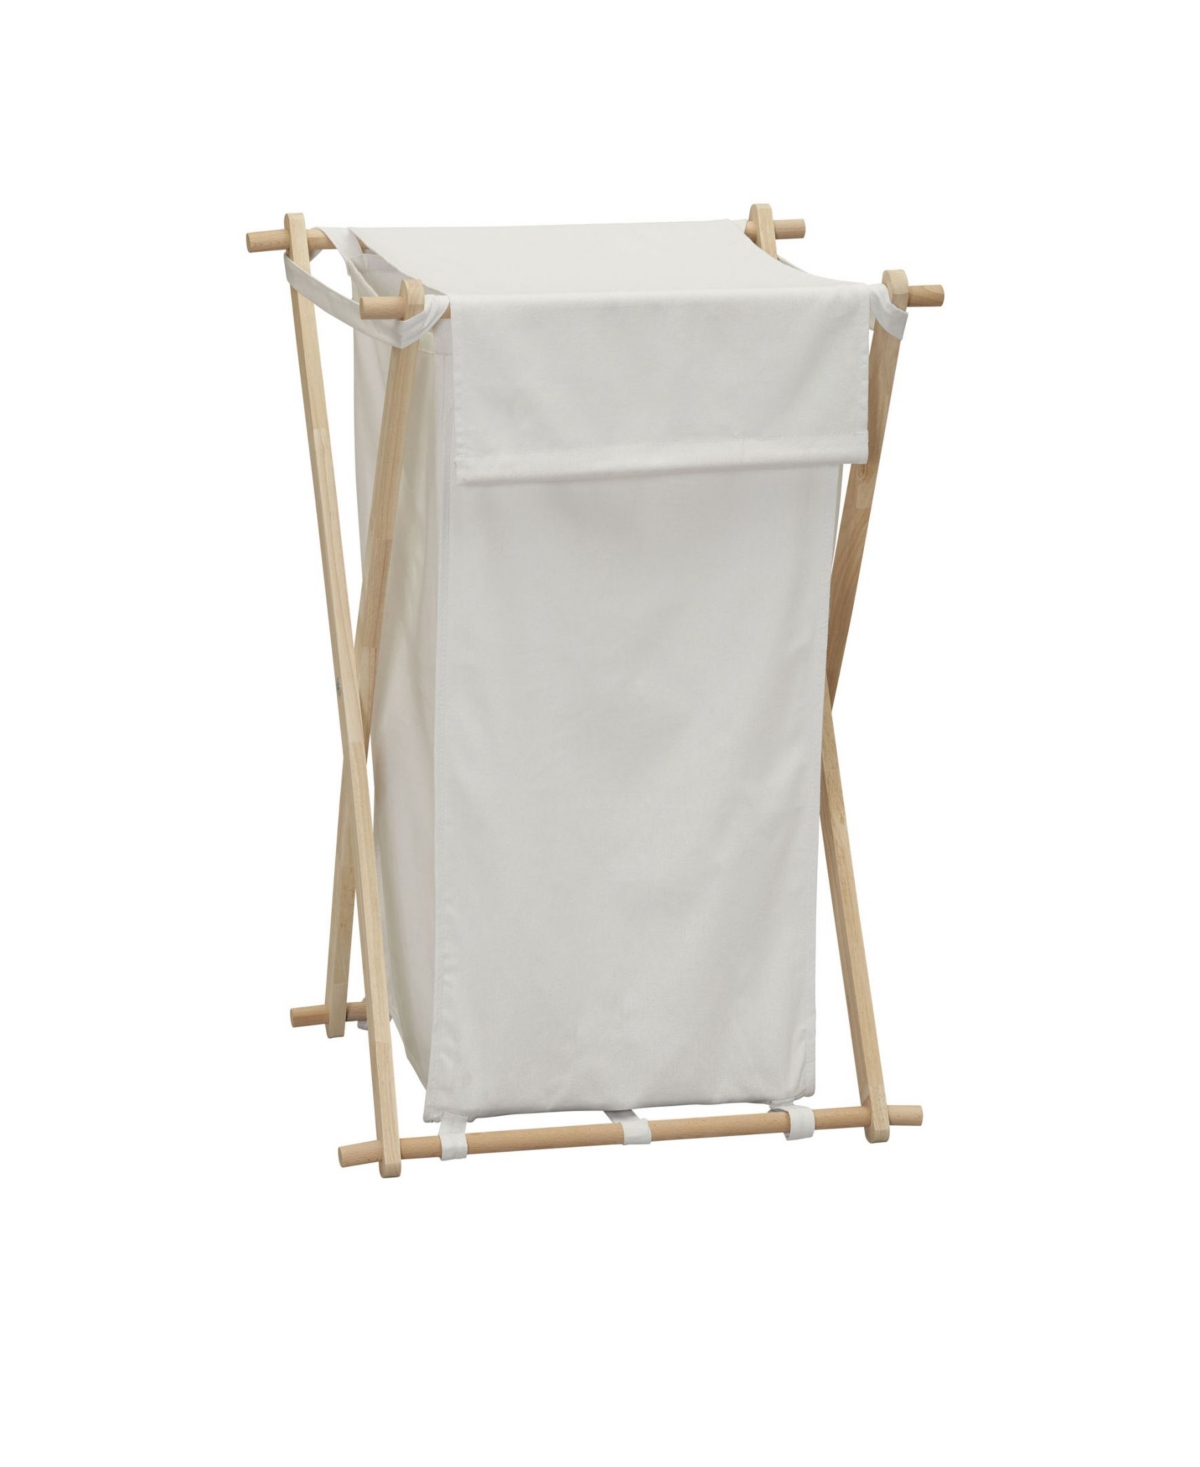 Household Essentials X-frame Wood Laundry Hamper In White